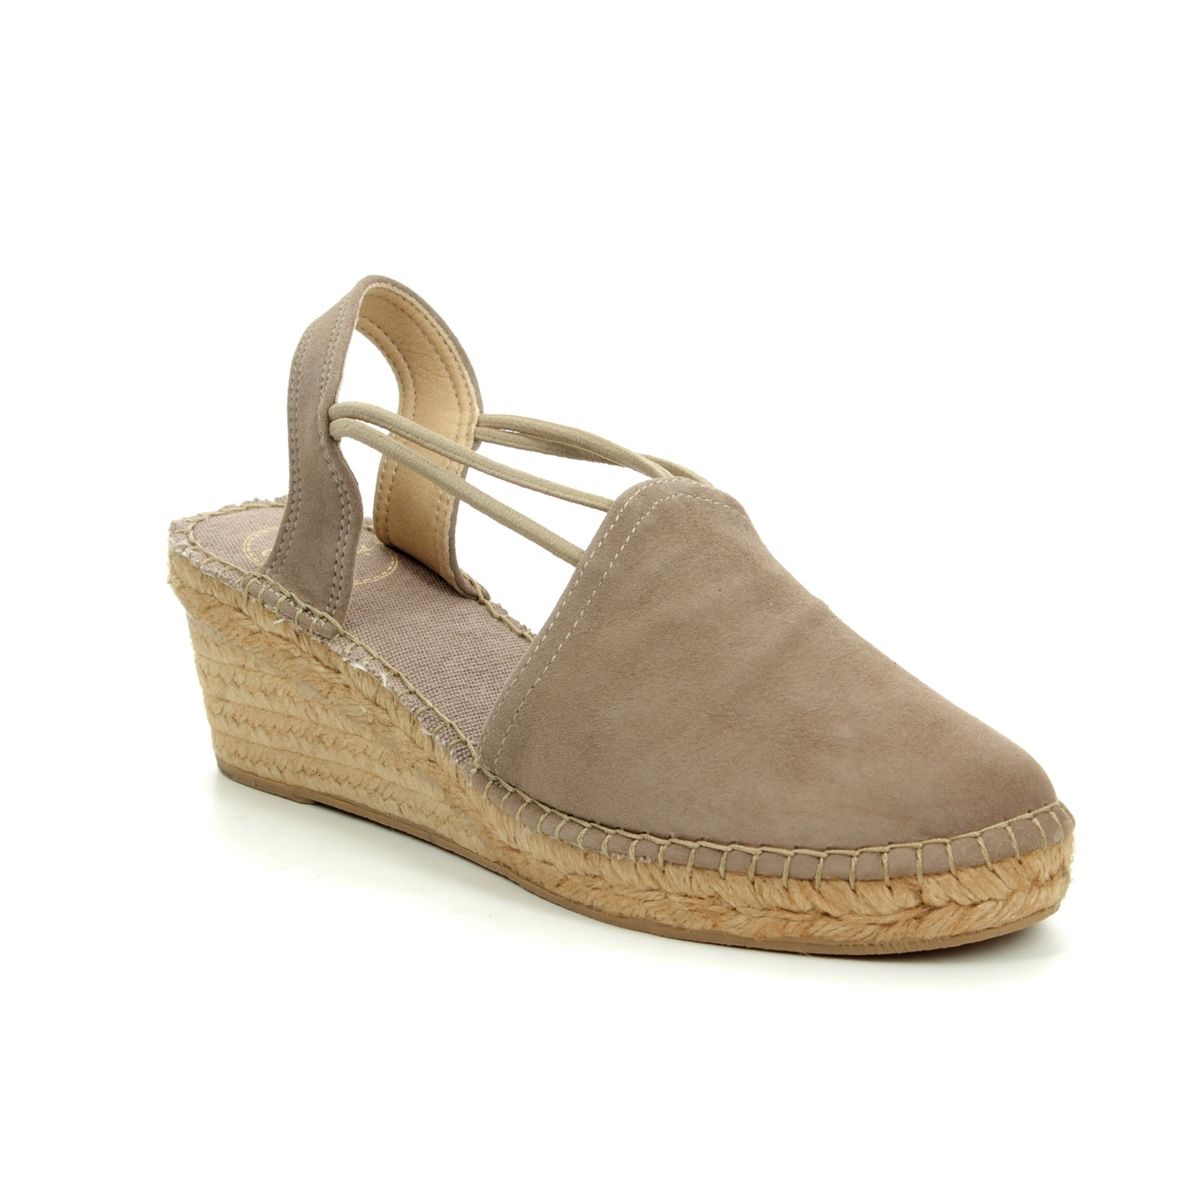 Toni Pons 9108-50 Taupe suede